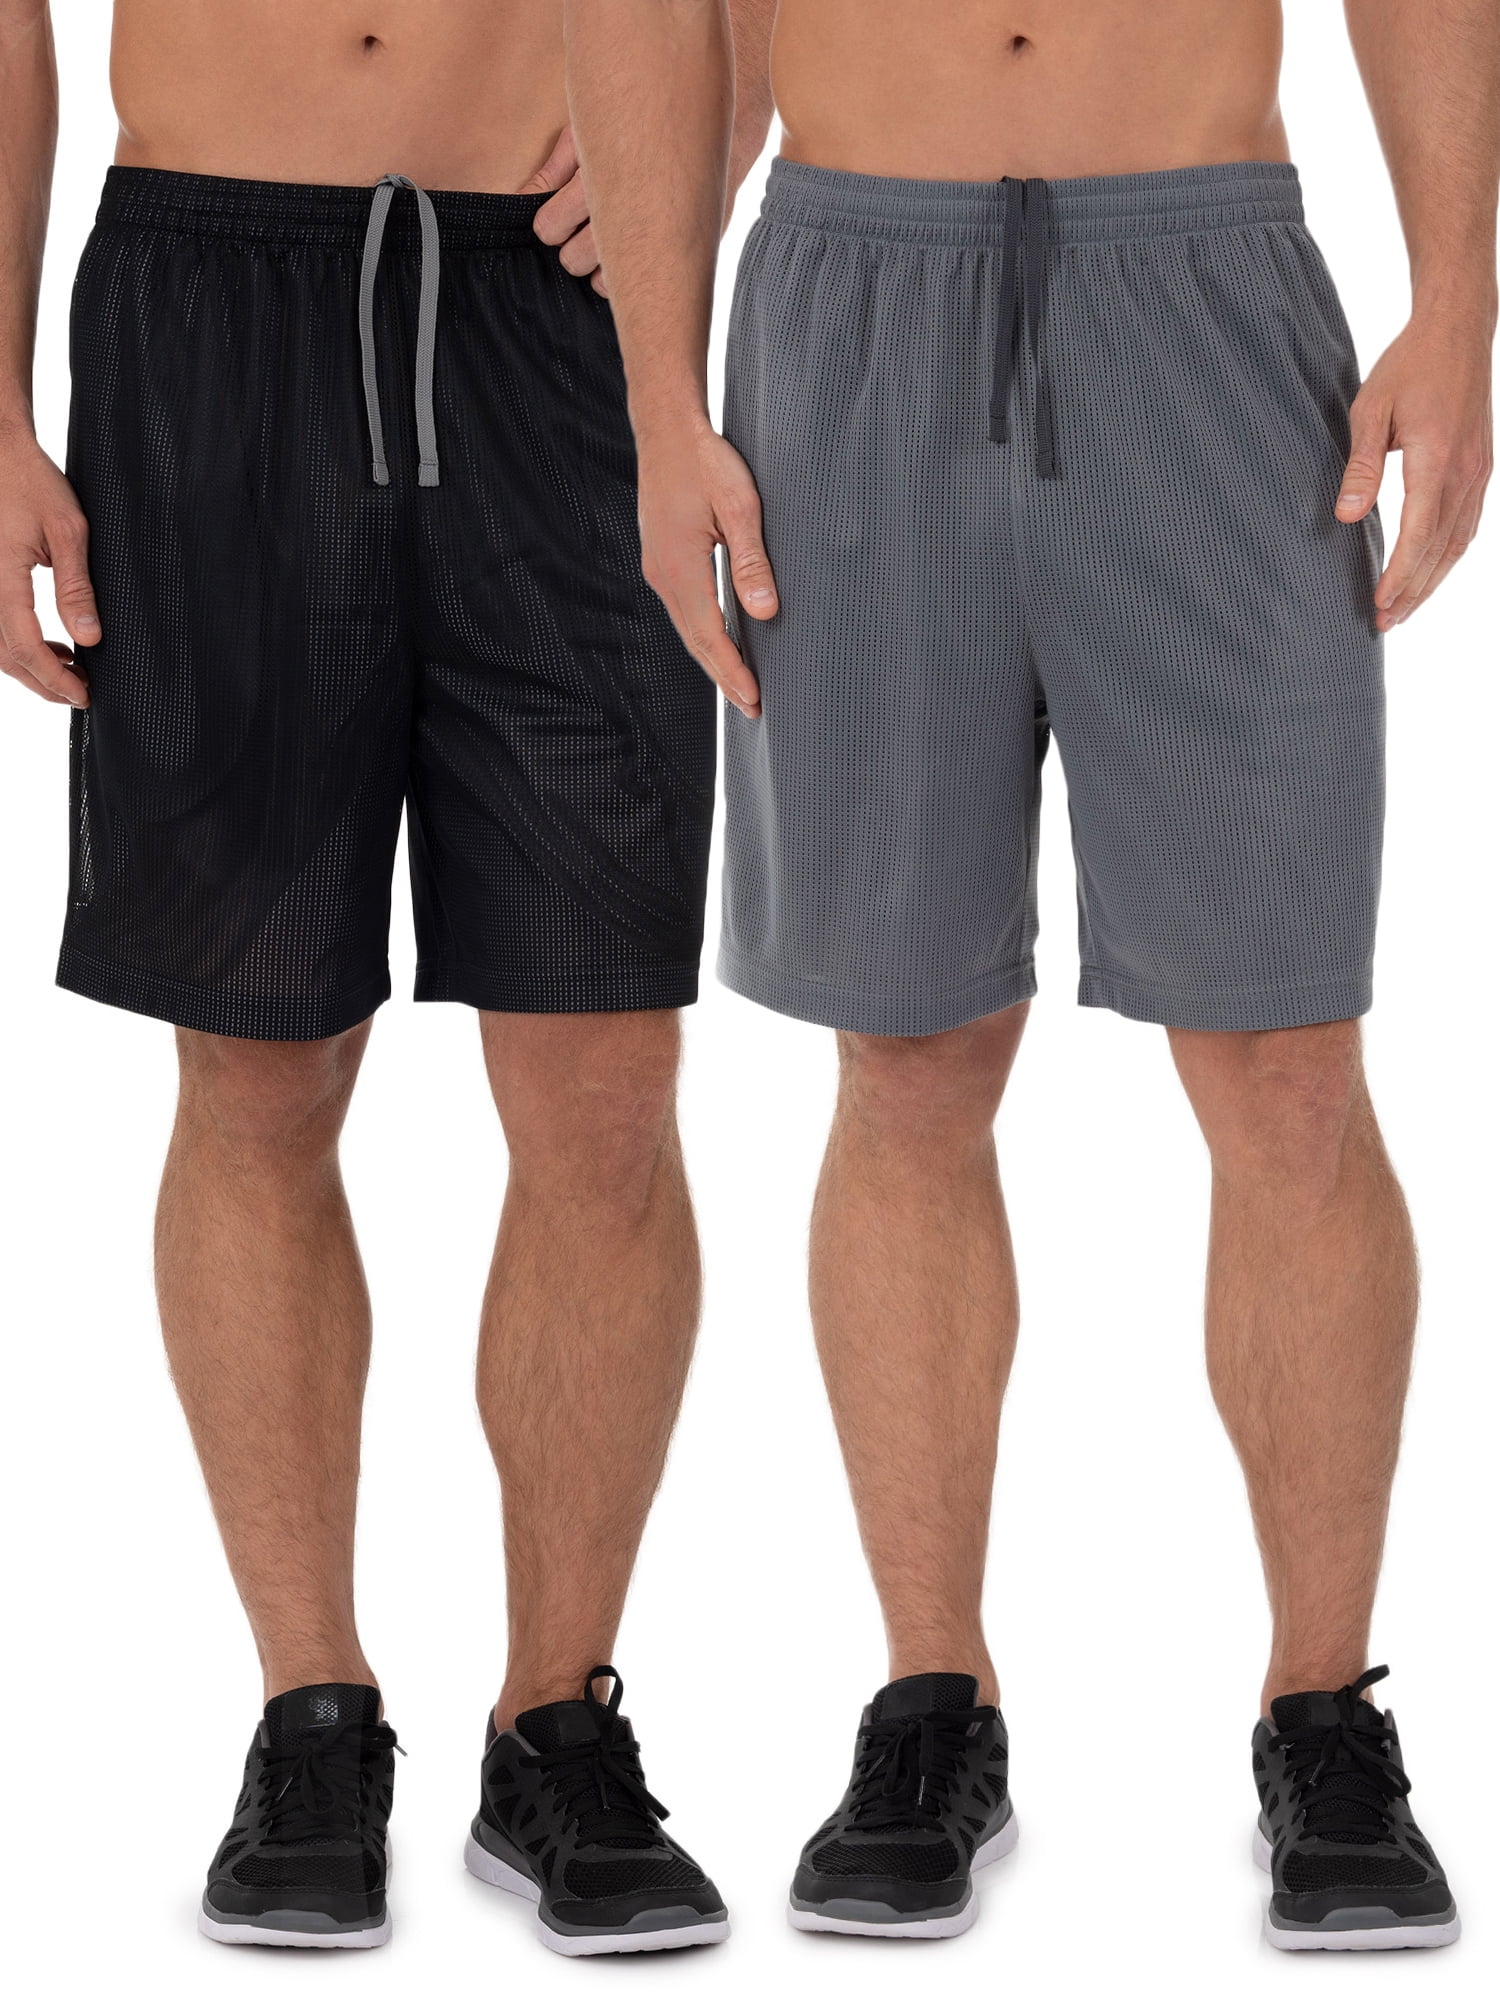 COSSNISS Mens 5 Athletic Workout Shorts with Mesh Pockets